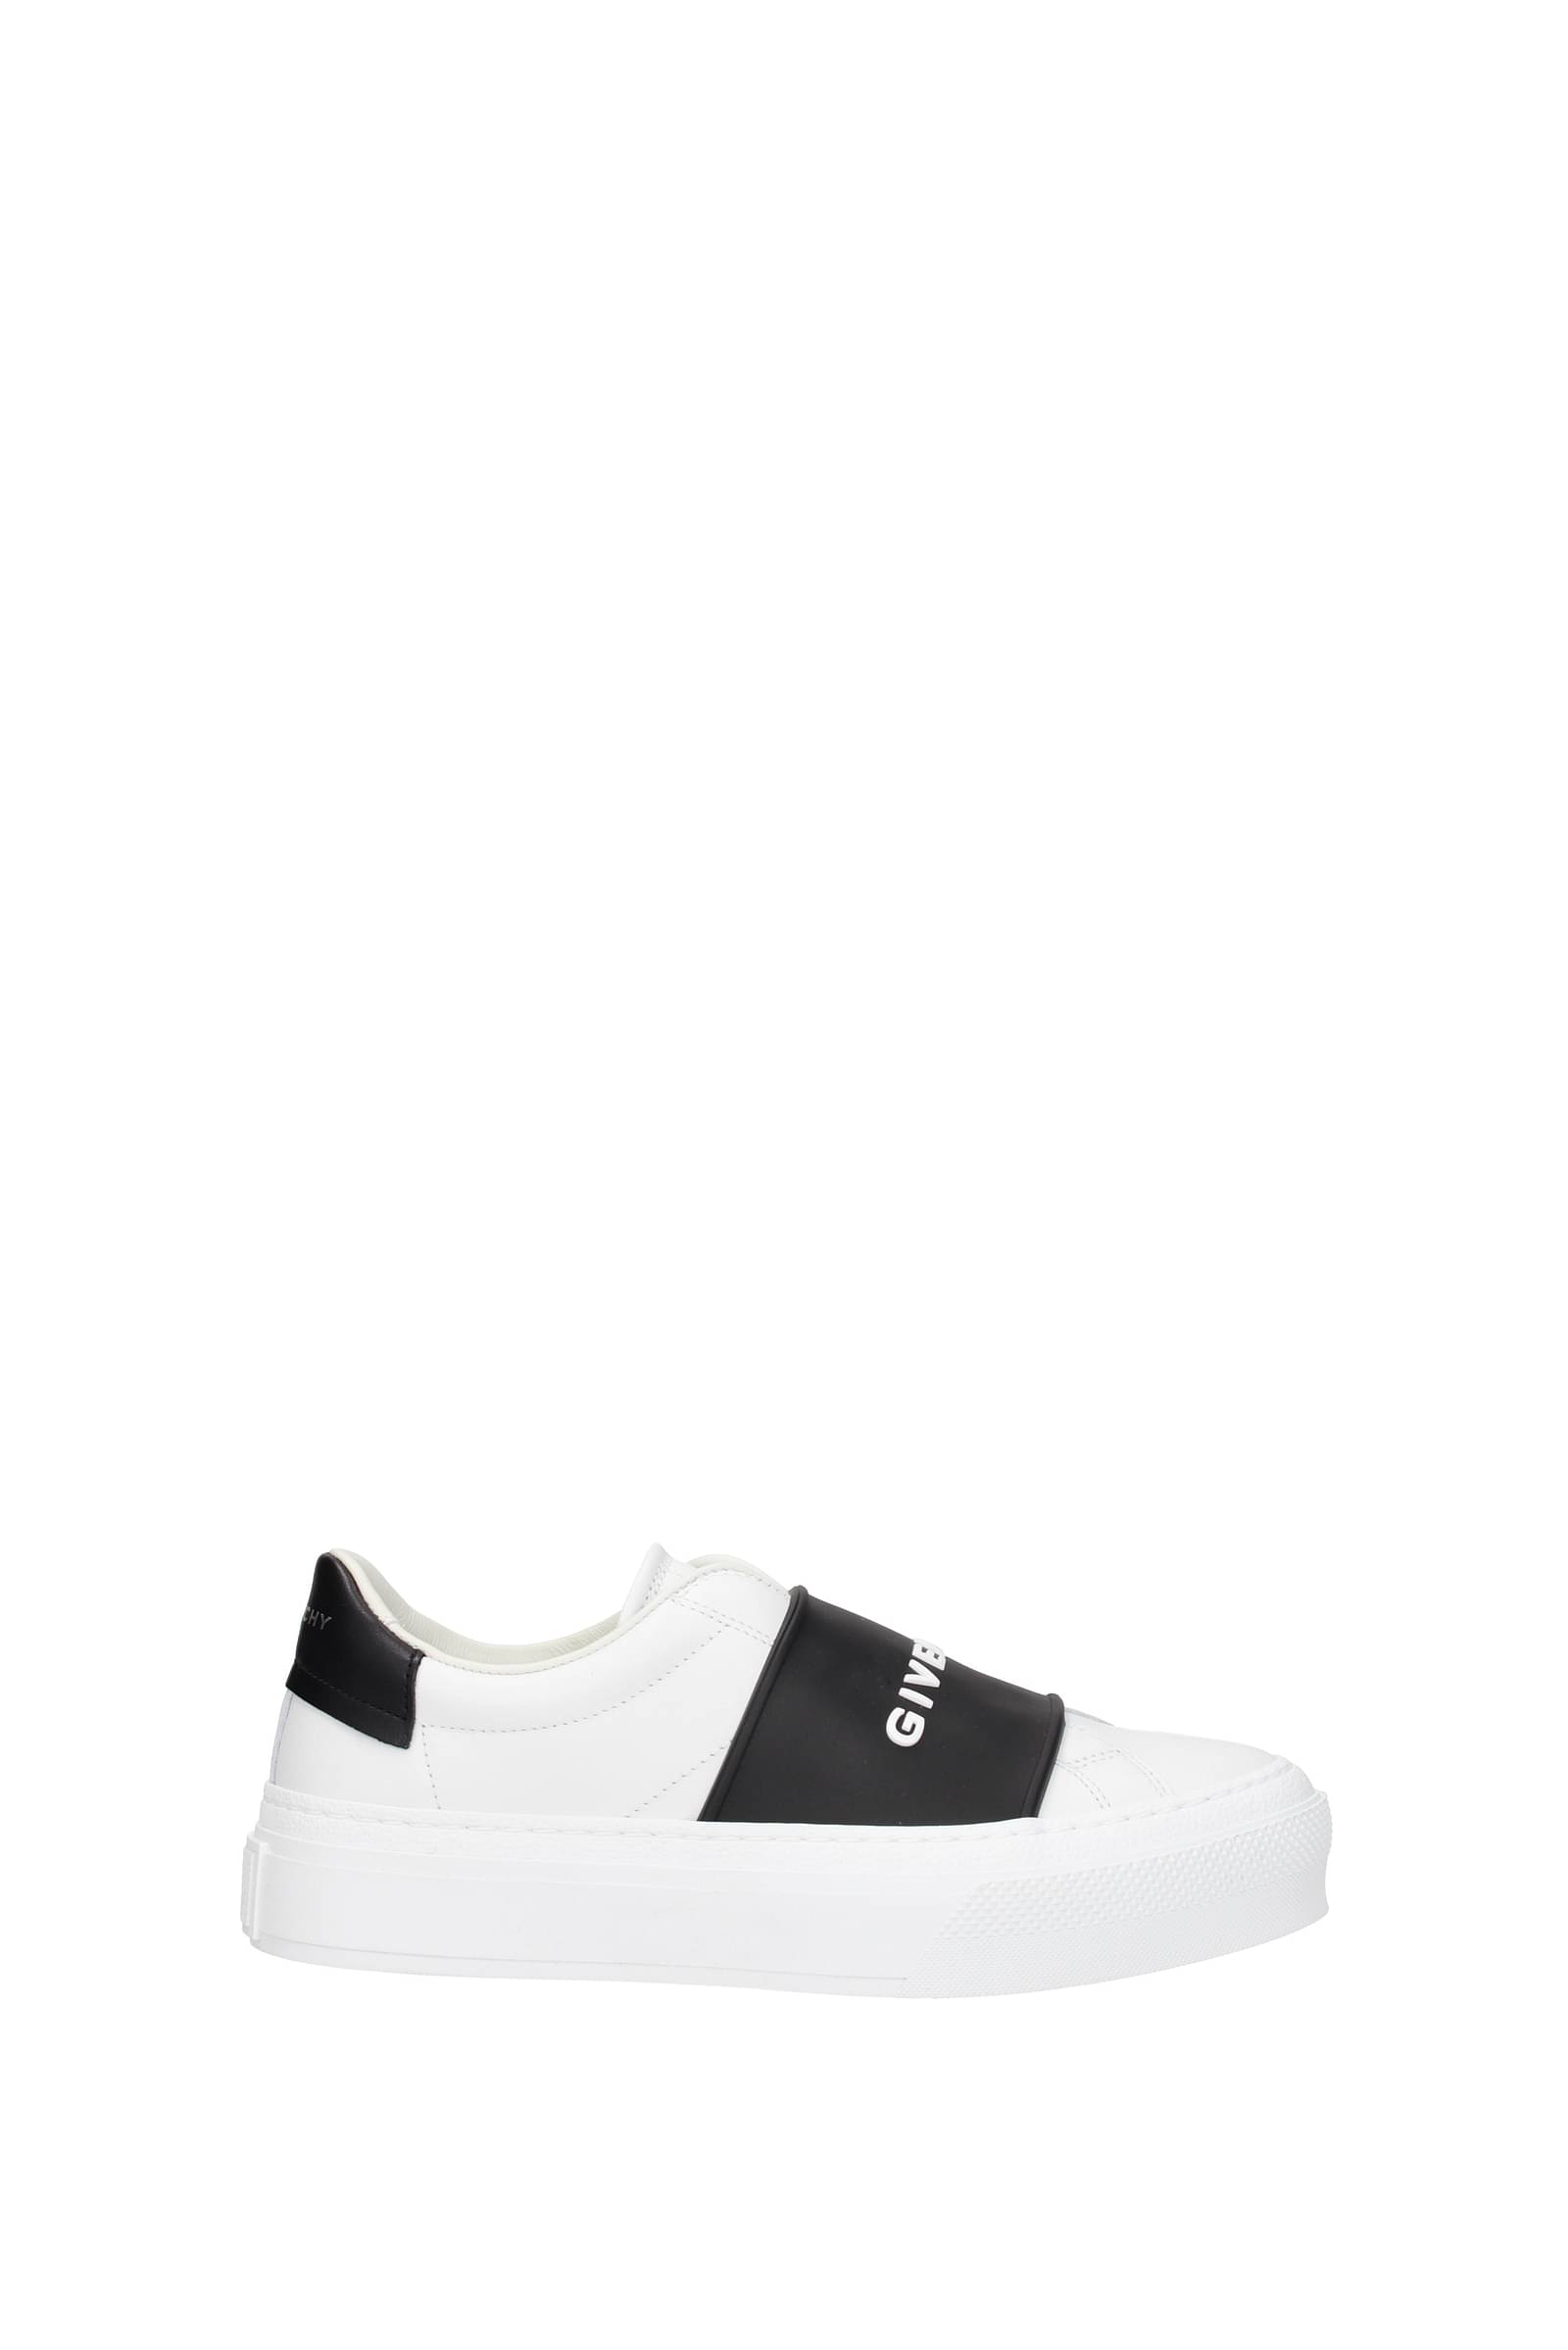 GIVENCHY Womens White Logo Urban Street Round Toe Platform Lace-Up Leather  Athletic Sneakers Shoes 35 - Walmart.com